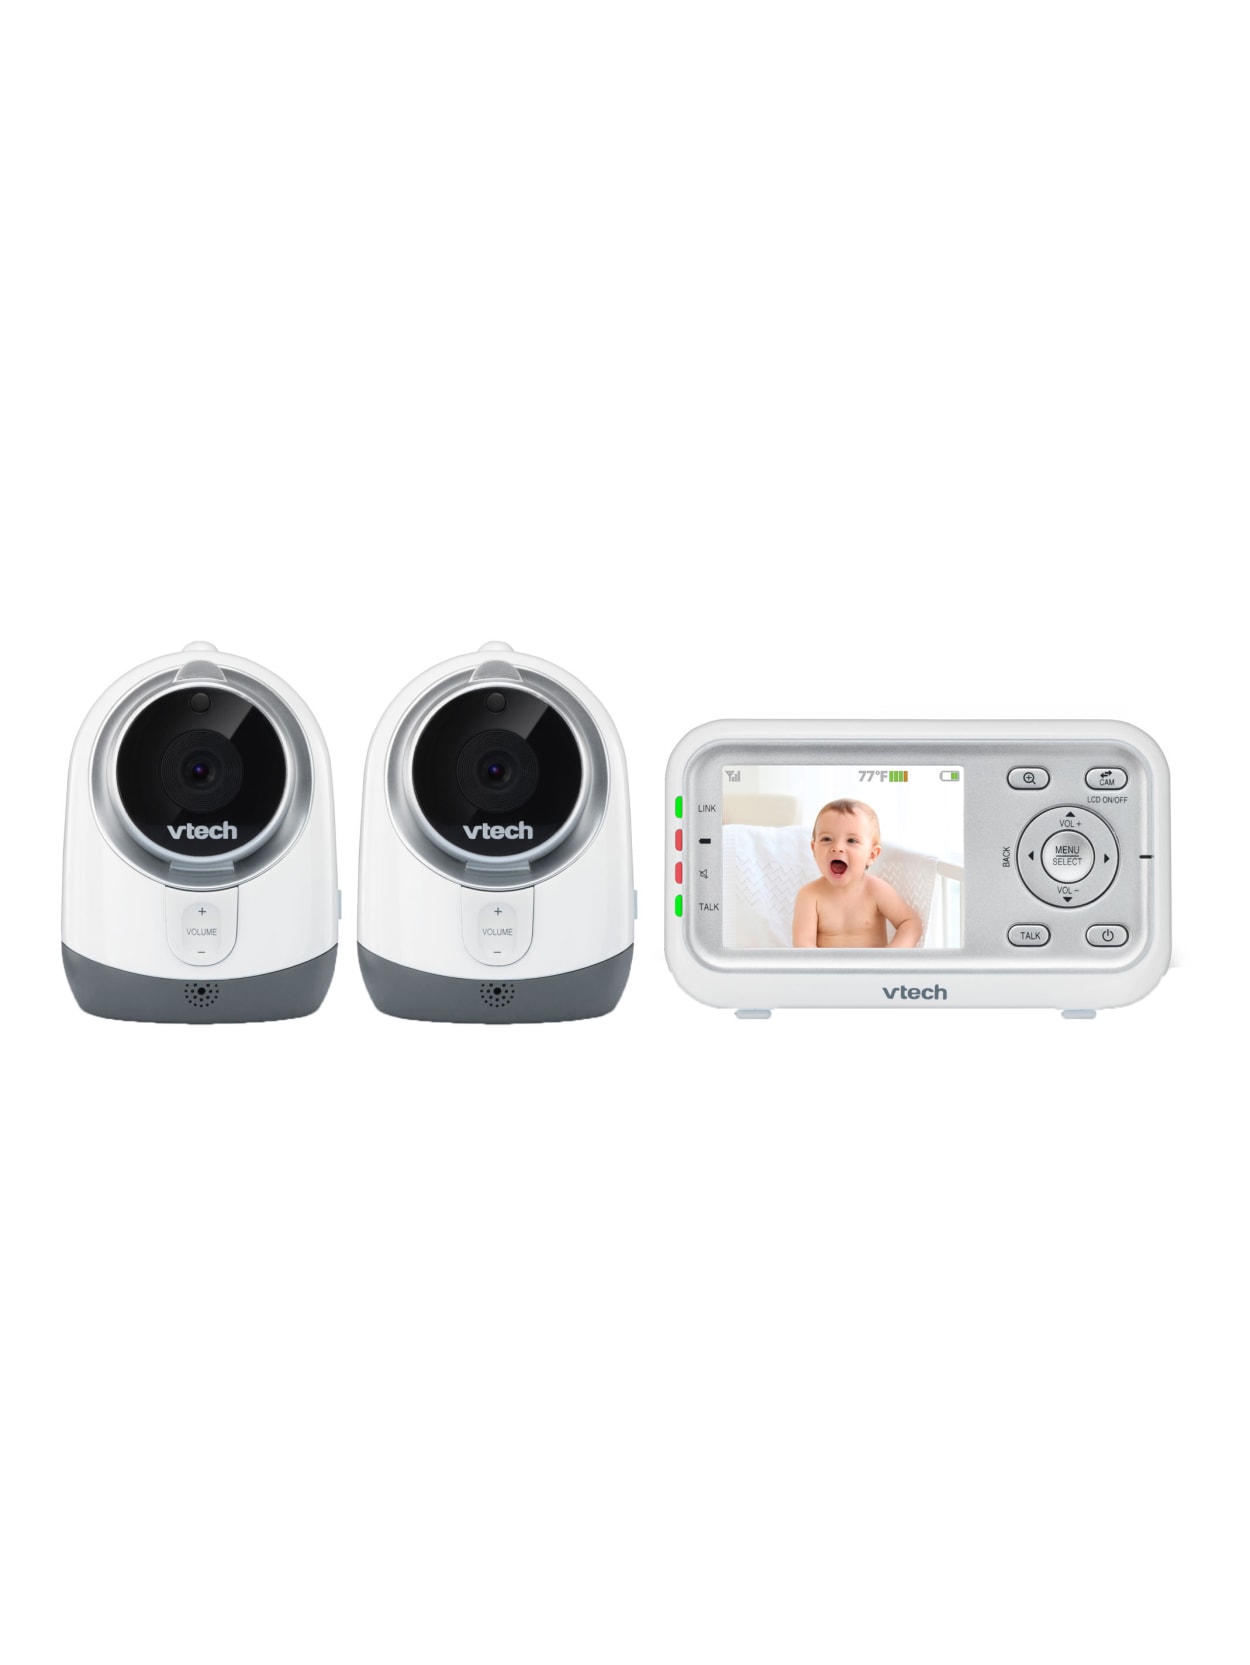 vtech expandable baby monitor